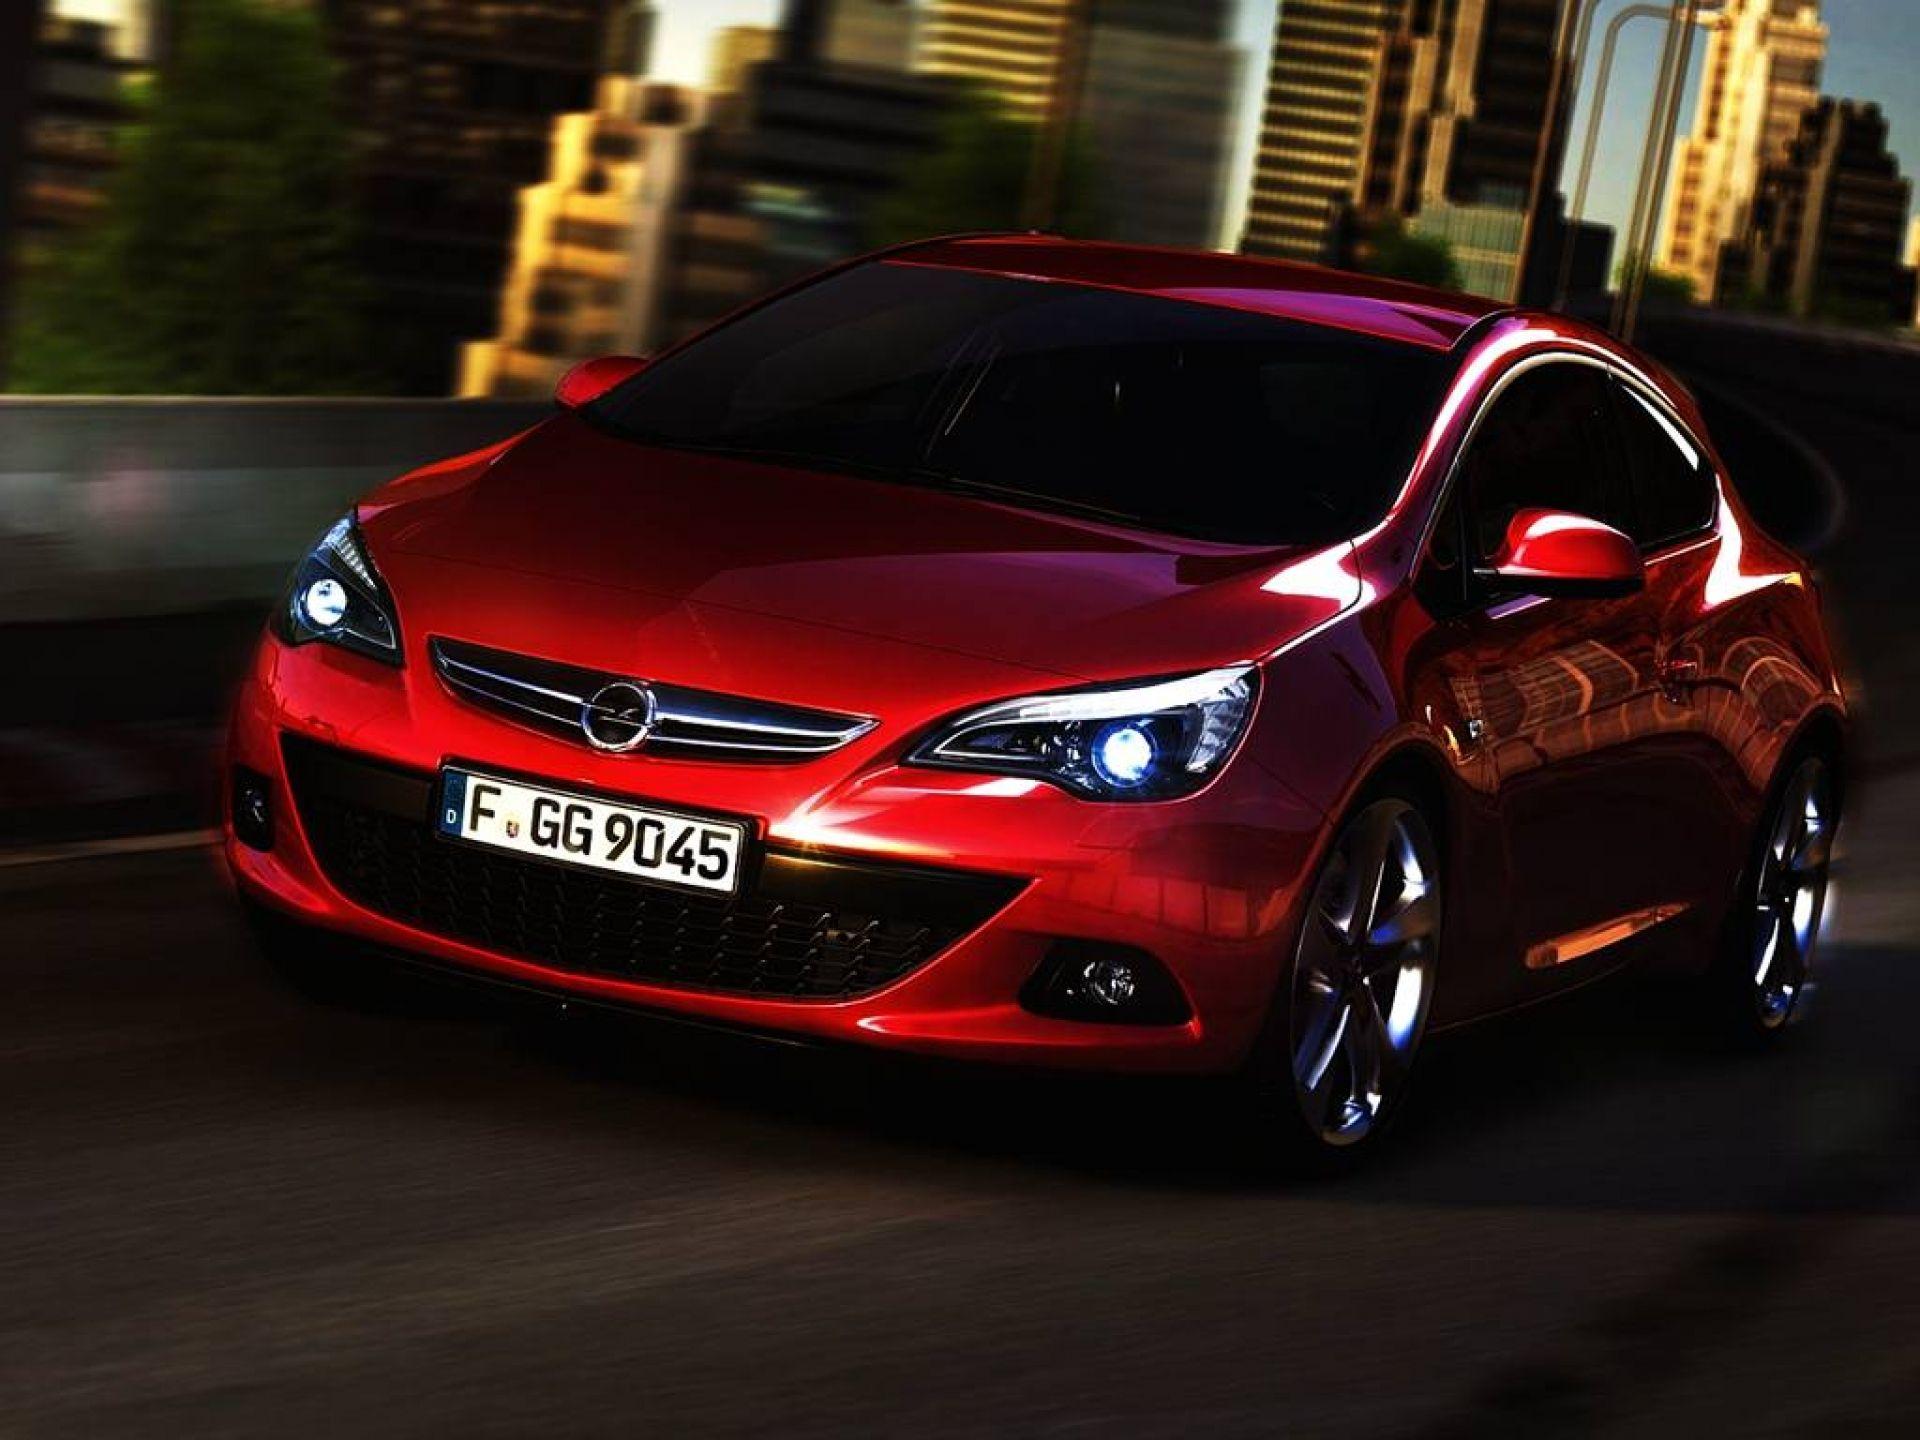 Opel free HD wallpaper and car picture for desktop background